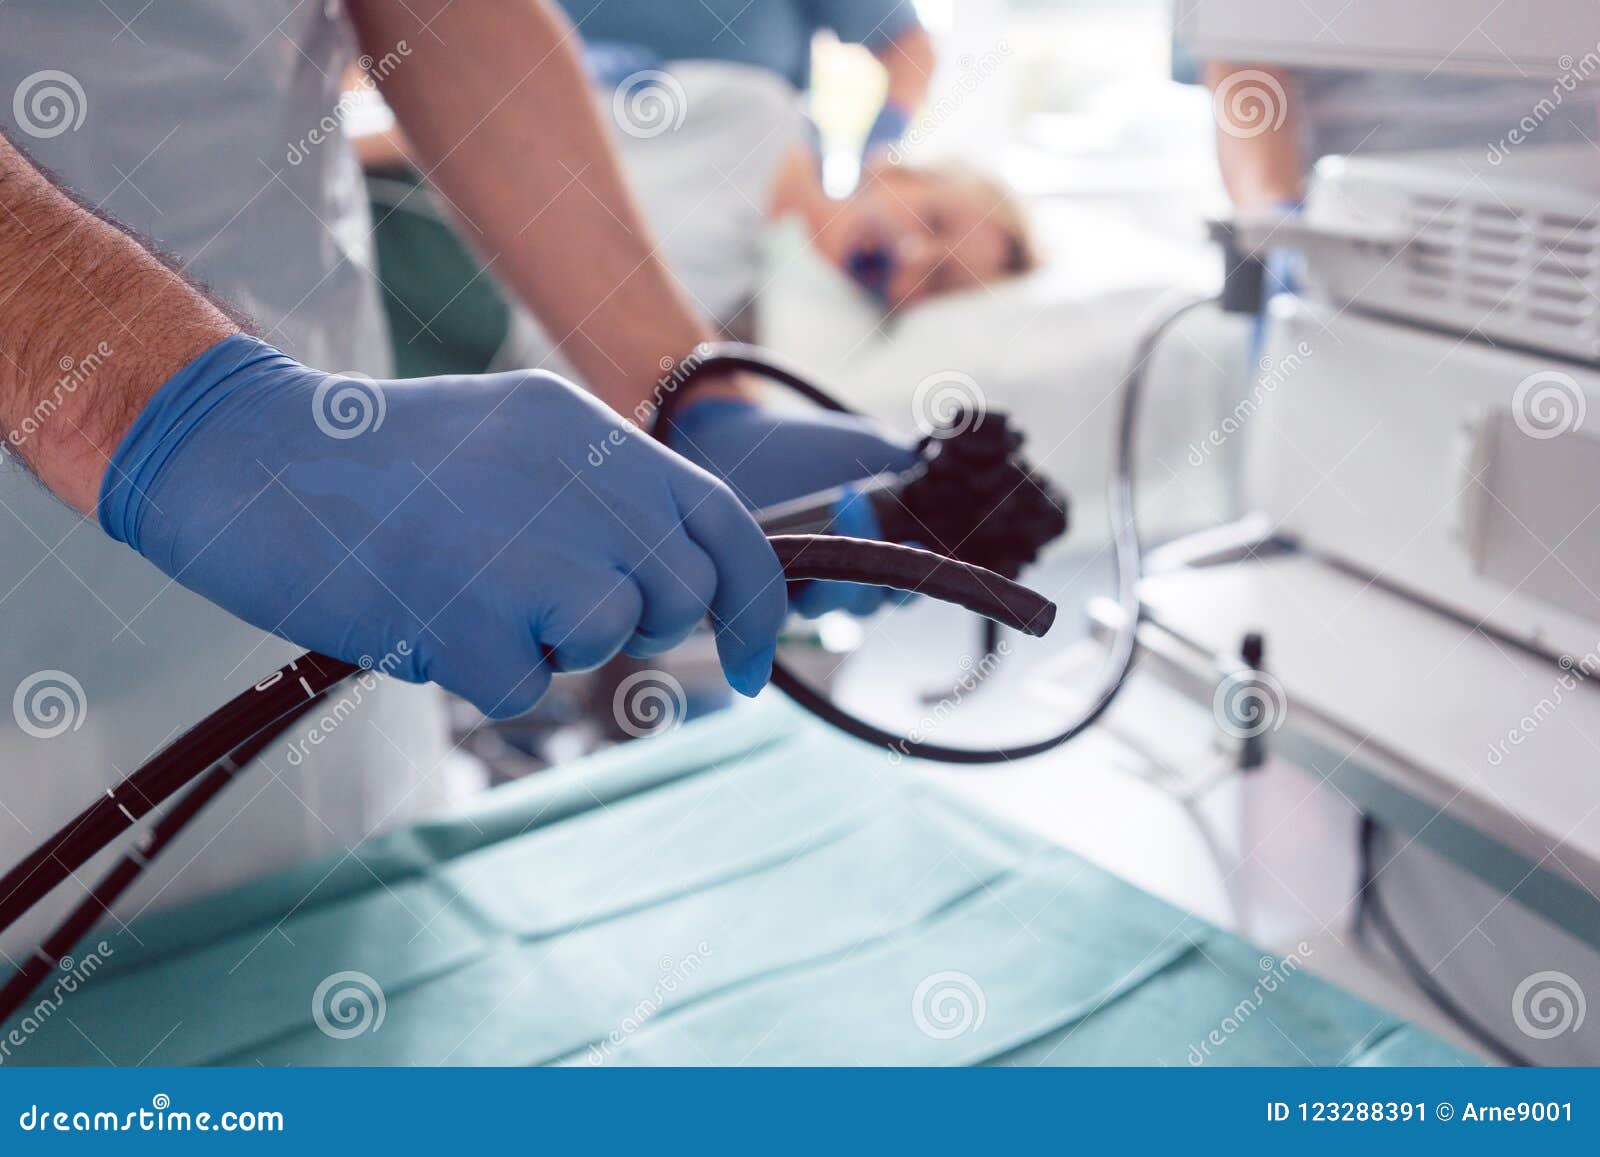 internist doctors during stomach examination